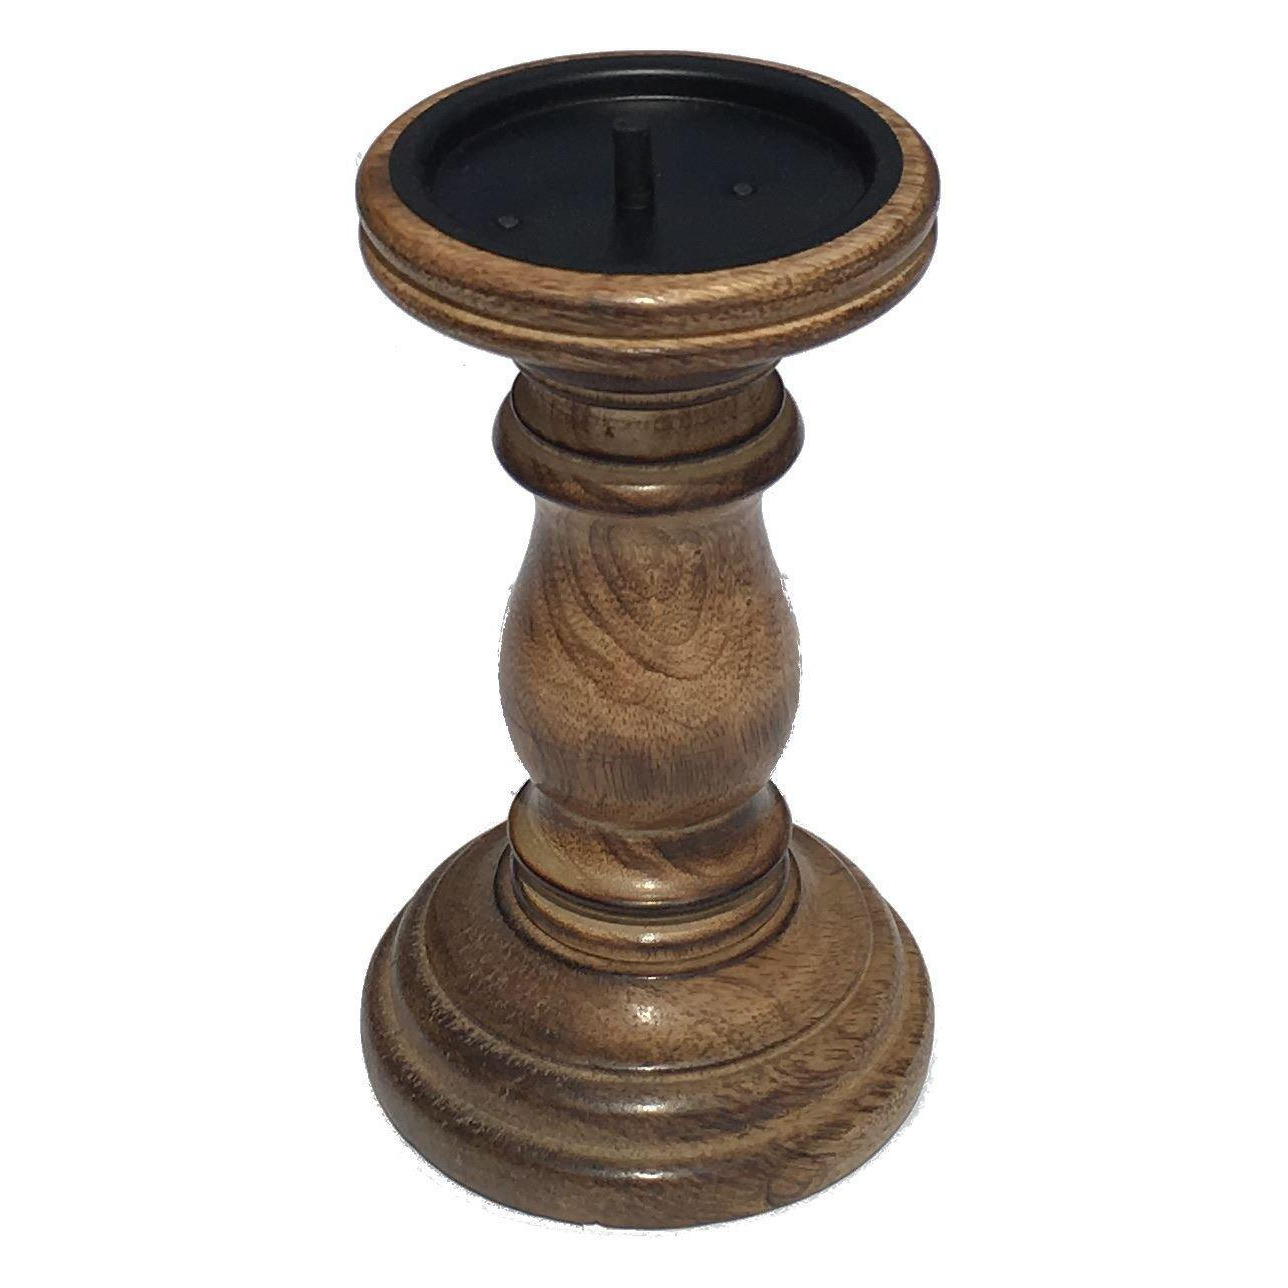 Rustic Antique Carved Wooden Pillar Church Candle Holder White Light, Large 31cm High - image 1